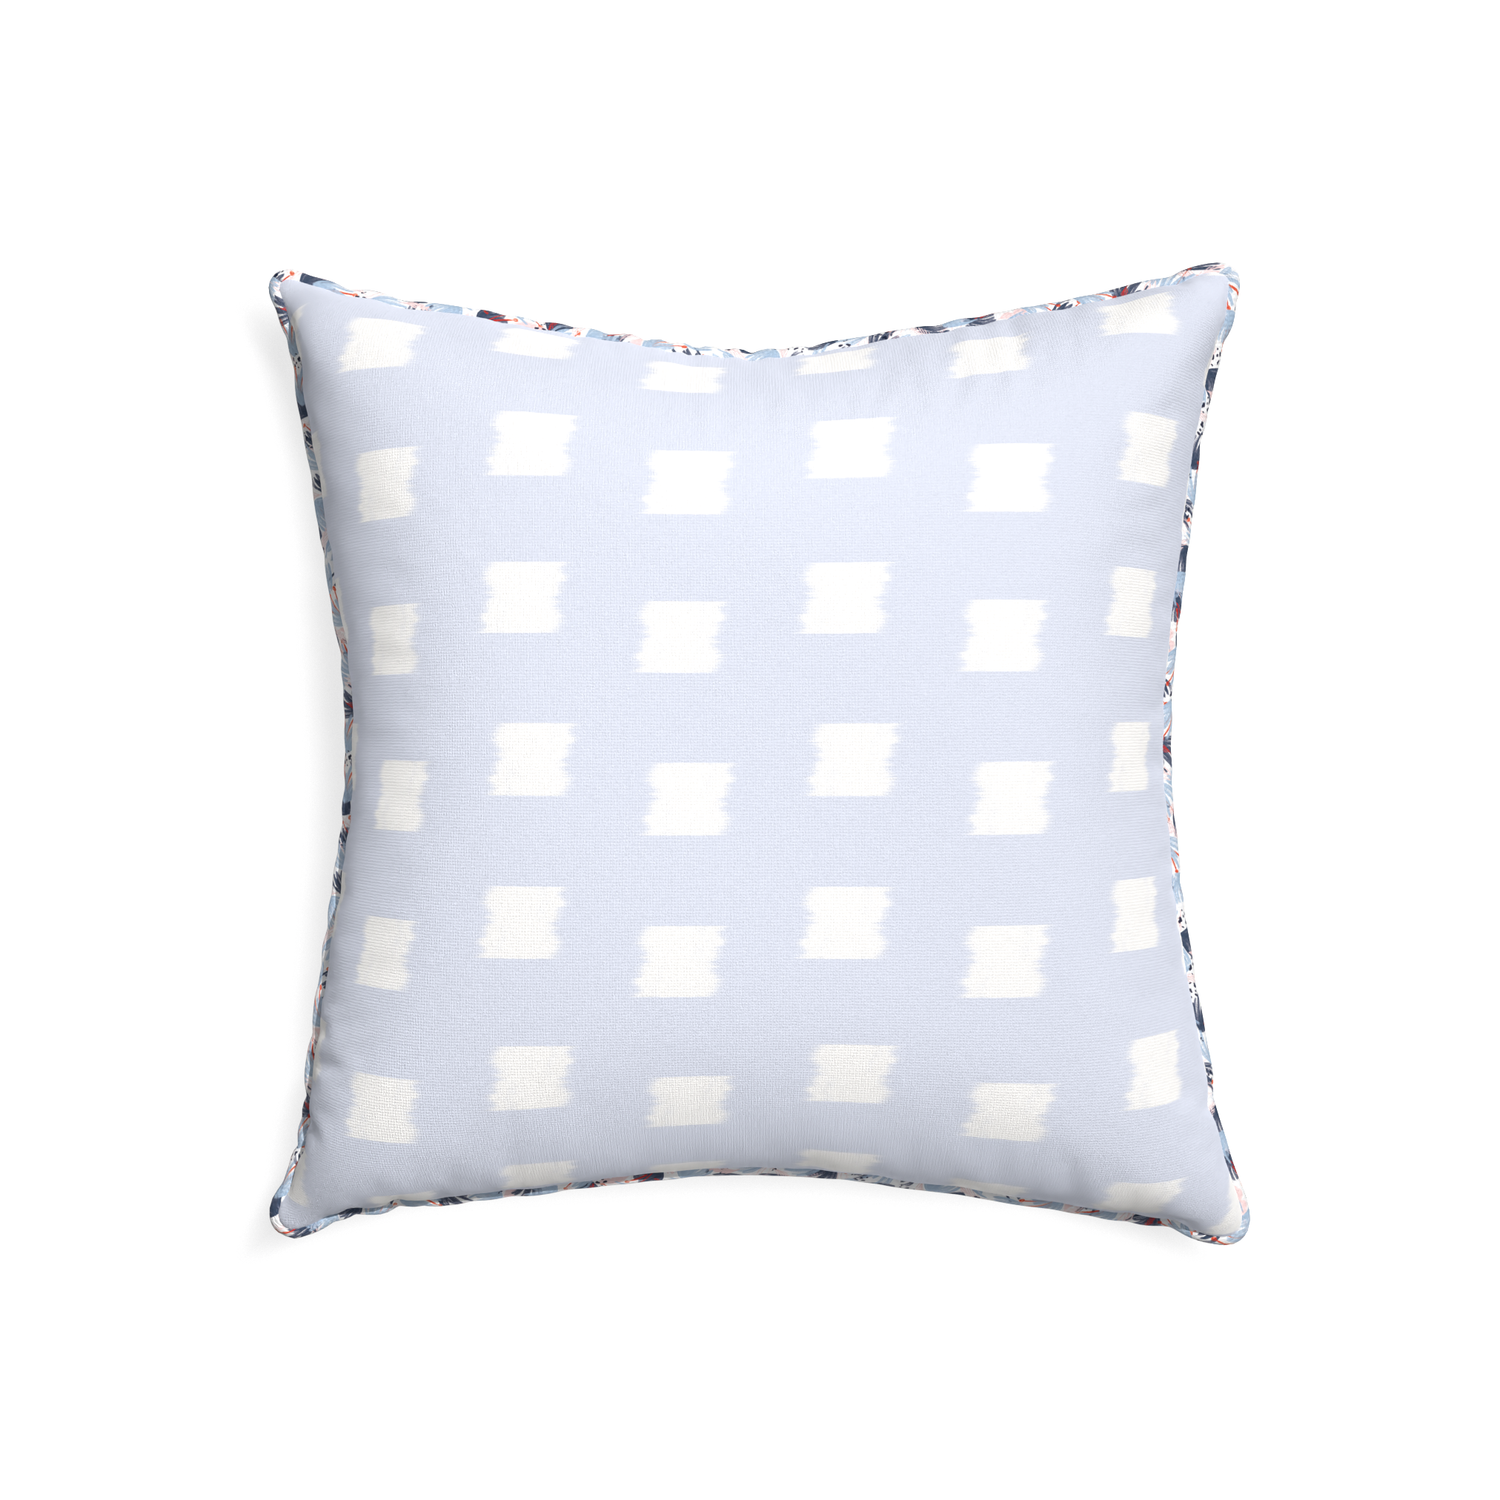 22-square denton custom pillow with e piping on white background